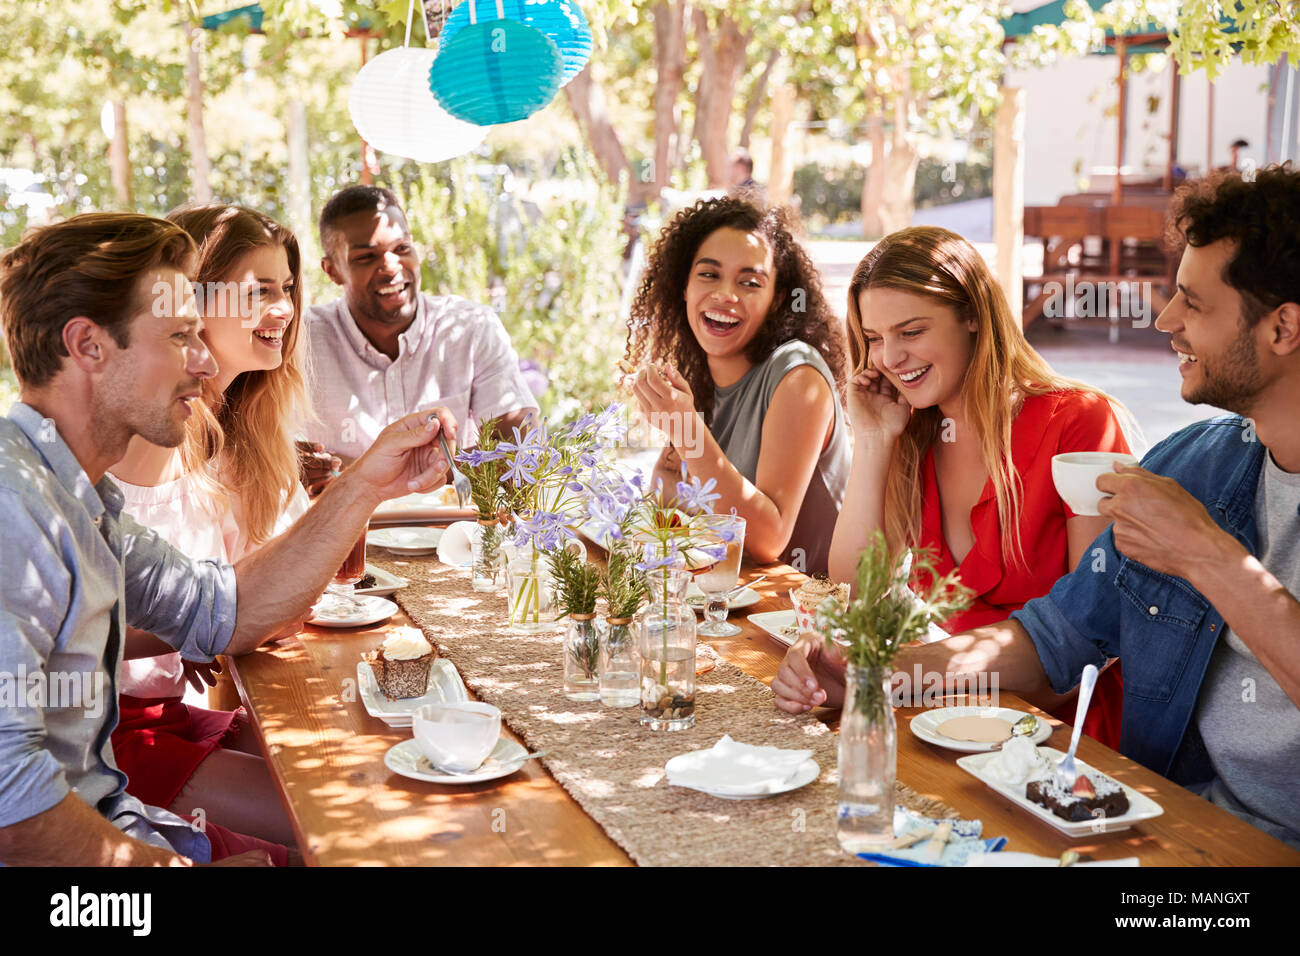 Six young friends dining at a table outdoors Stock Photo